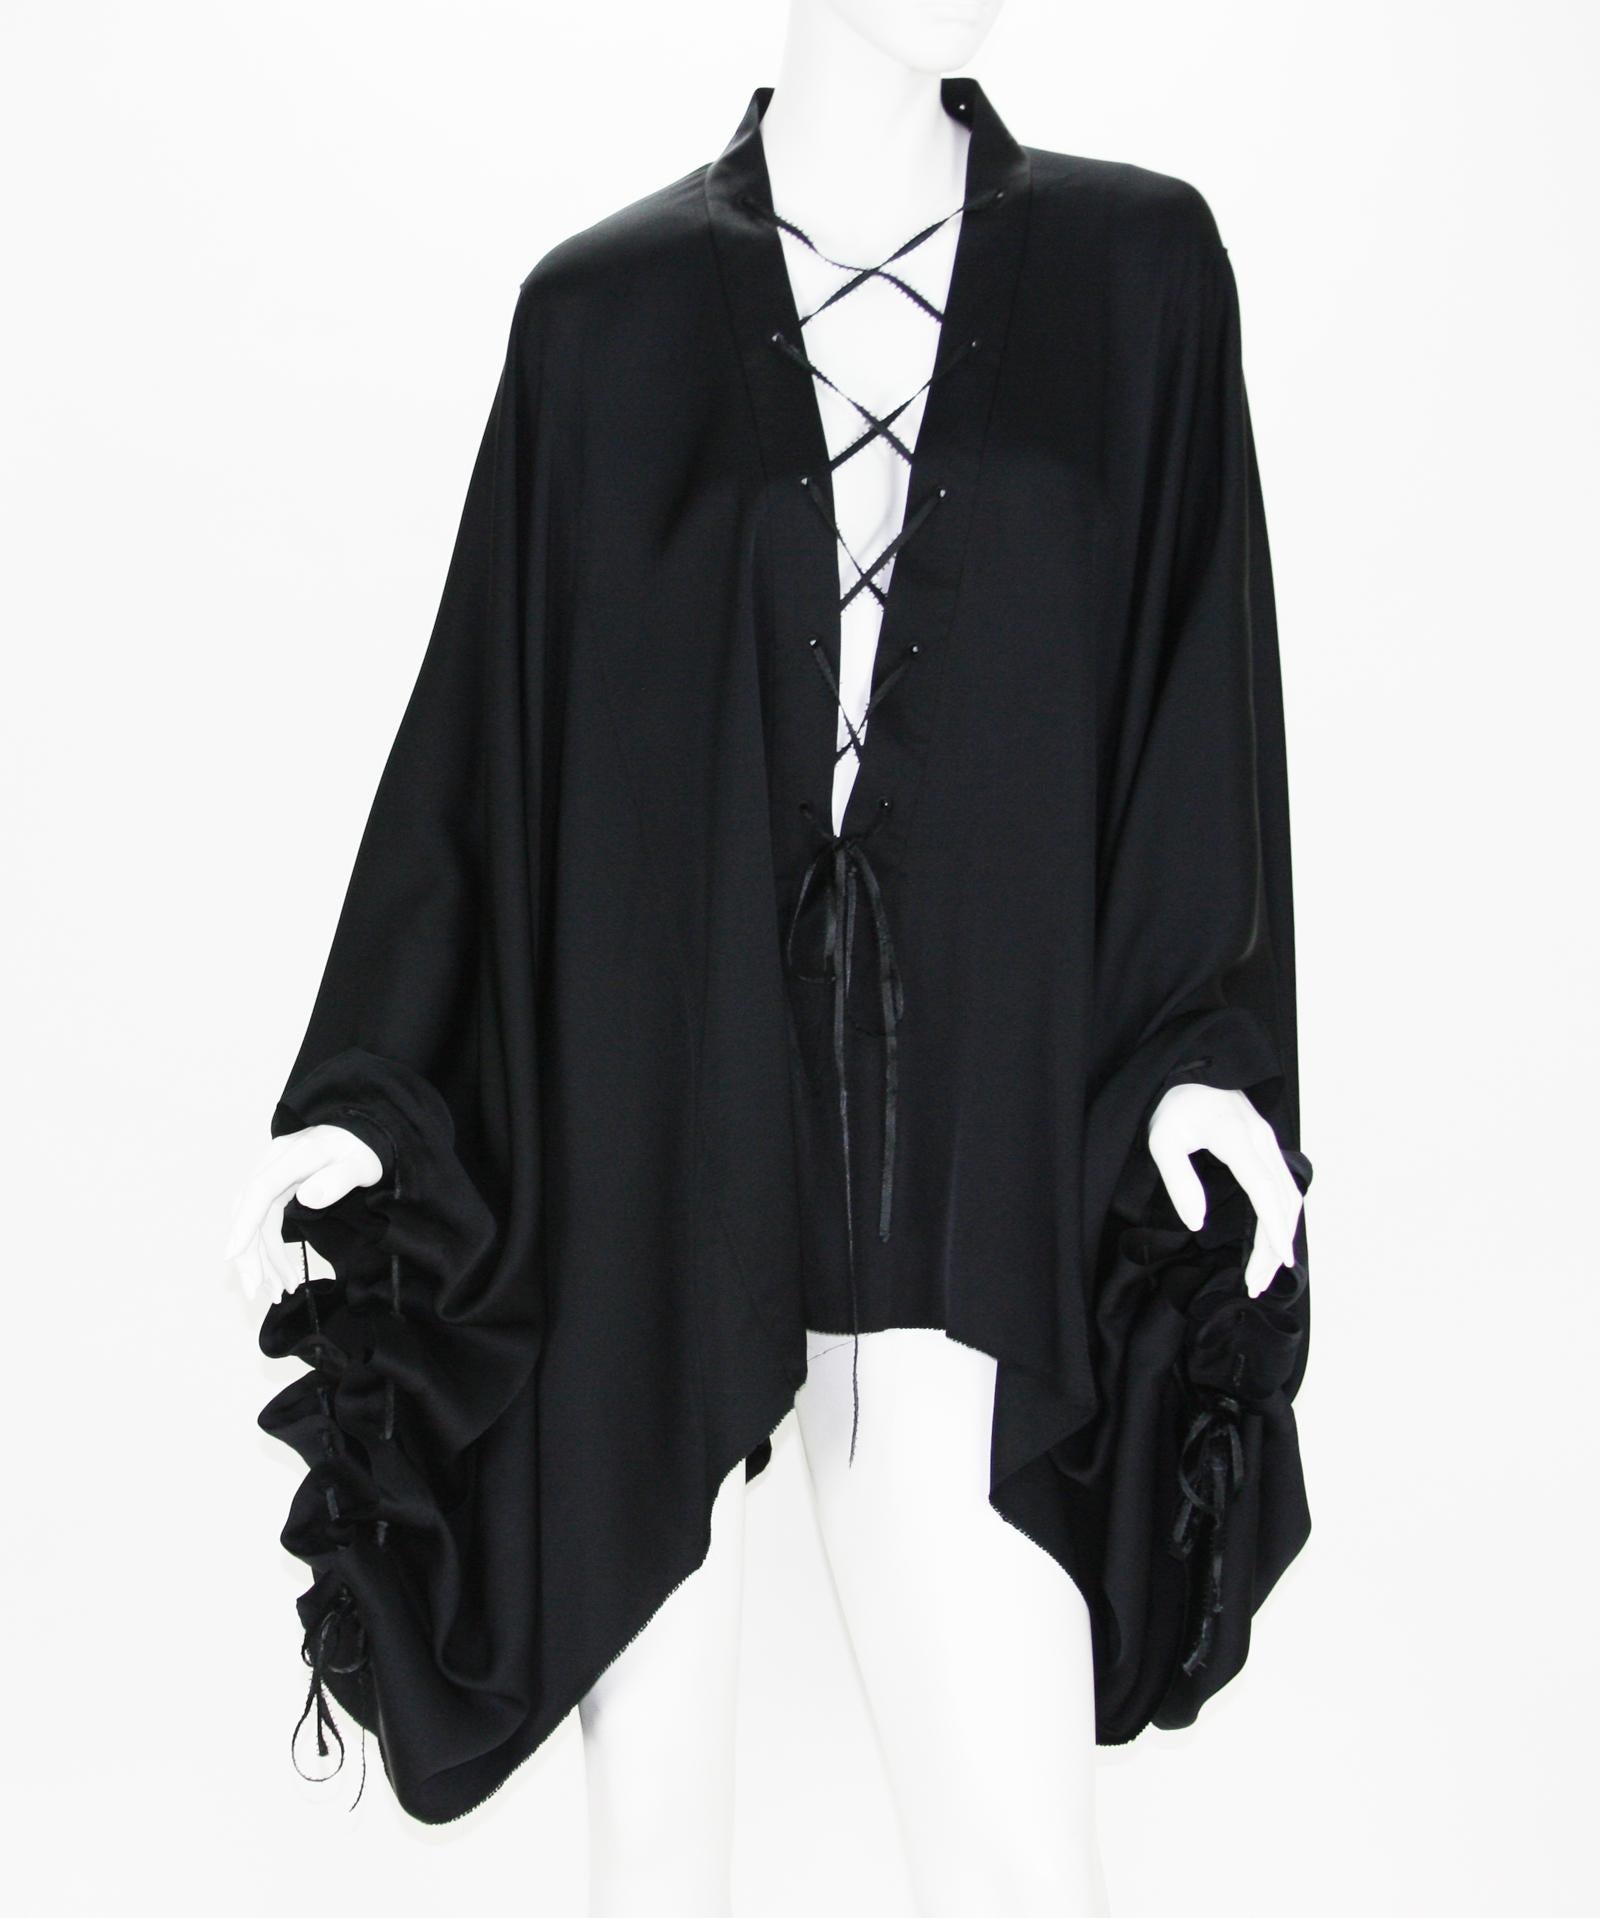 Very Rare Tom Ford for Gucci Silk Black Lace-Up Kimono Top
F/W 2002 Runway Collection
Designer size - 40 ( will fit most because of style )
100% Silk, Deep V-Neck Lace-Up Front, Adjustable Sleeve Ties.
Measurements: Length - 29 inches, Armpit to